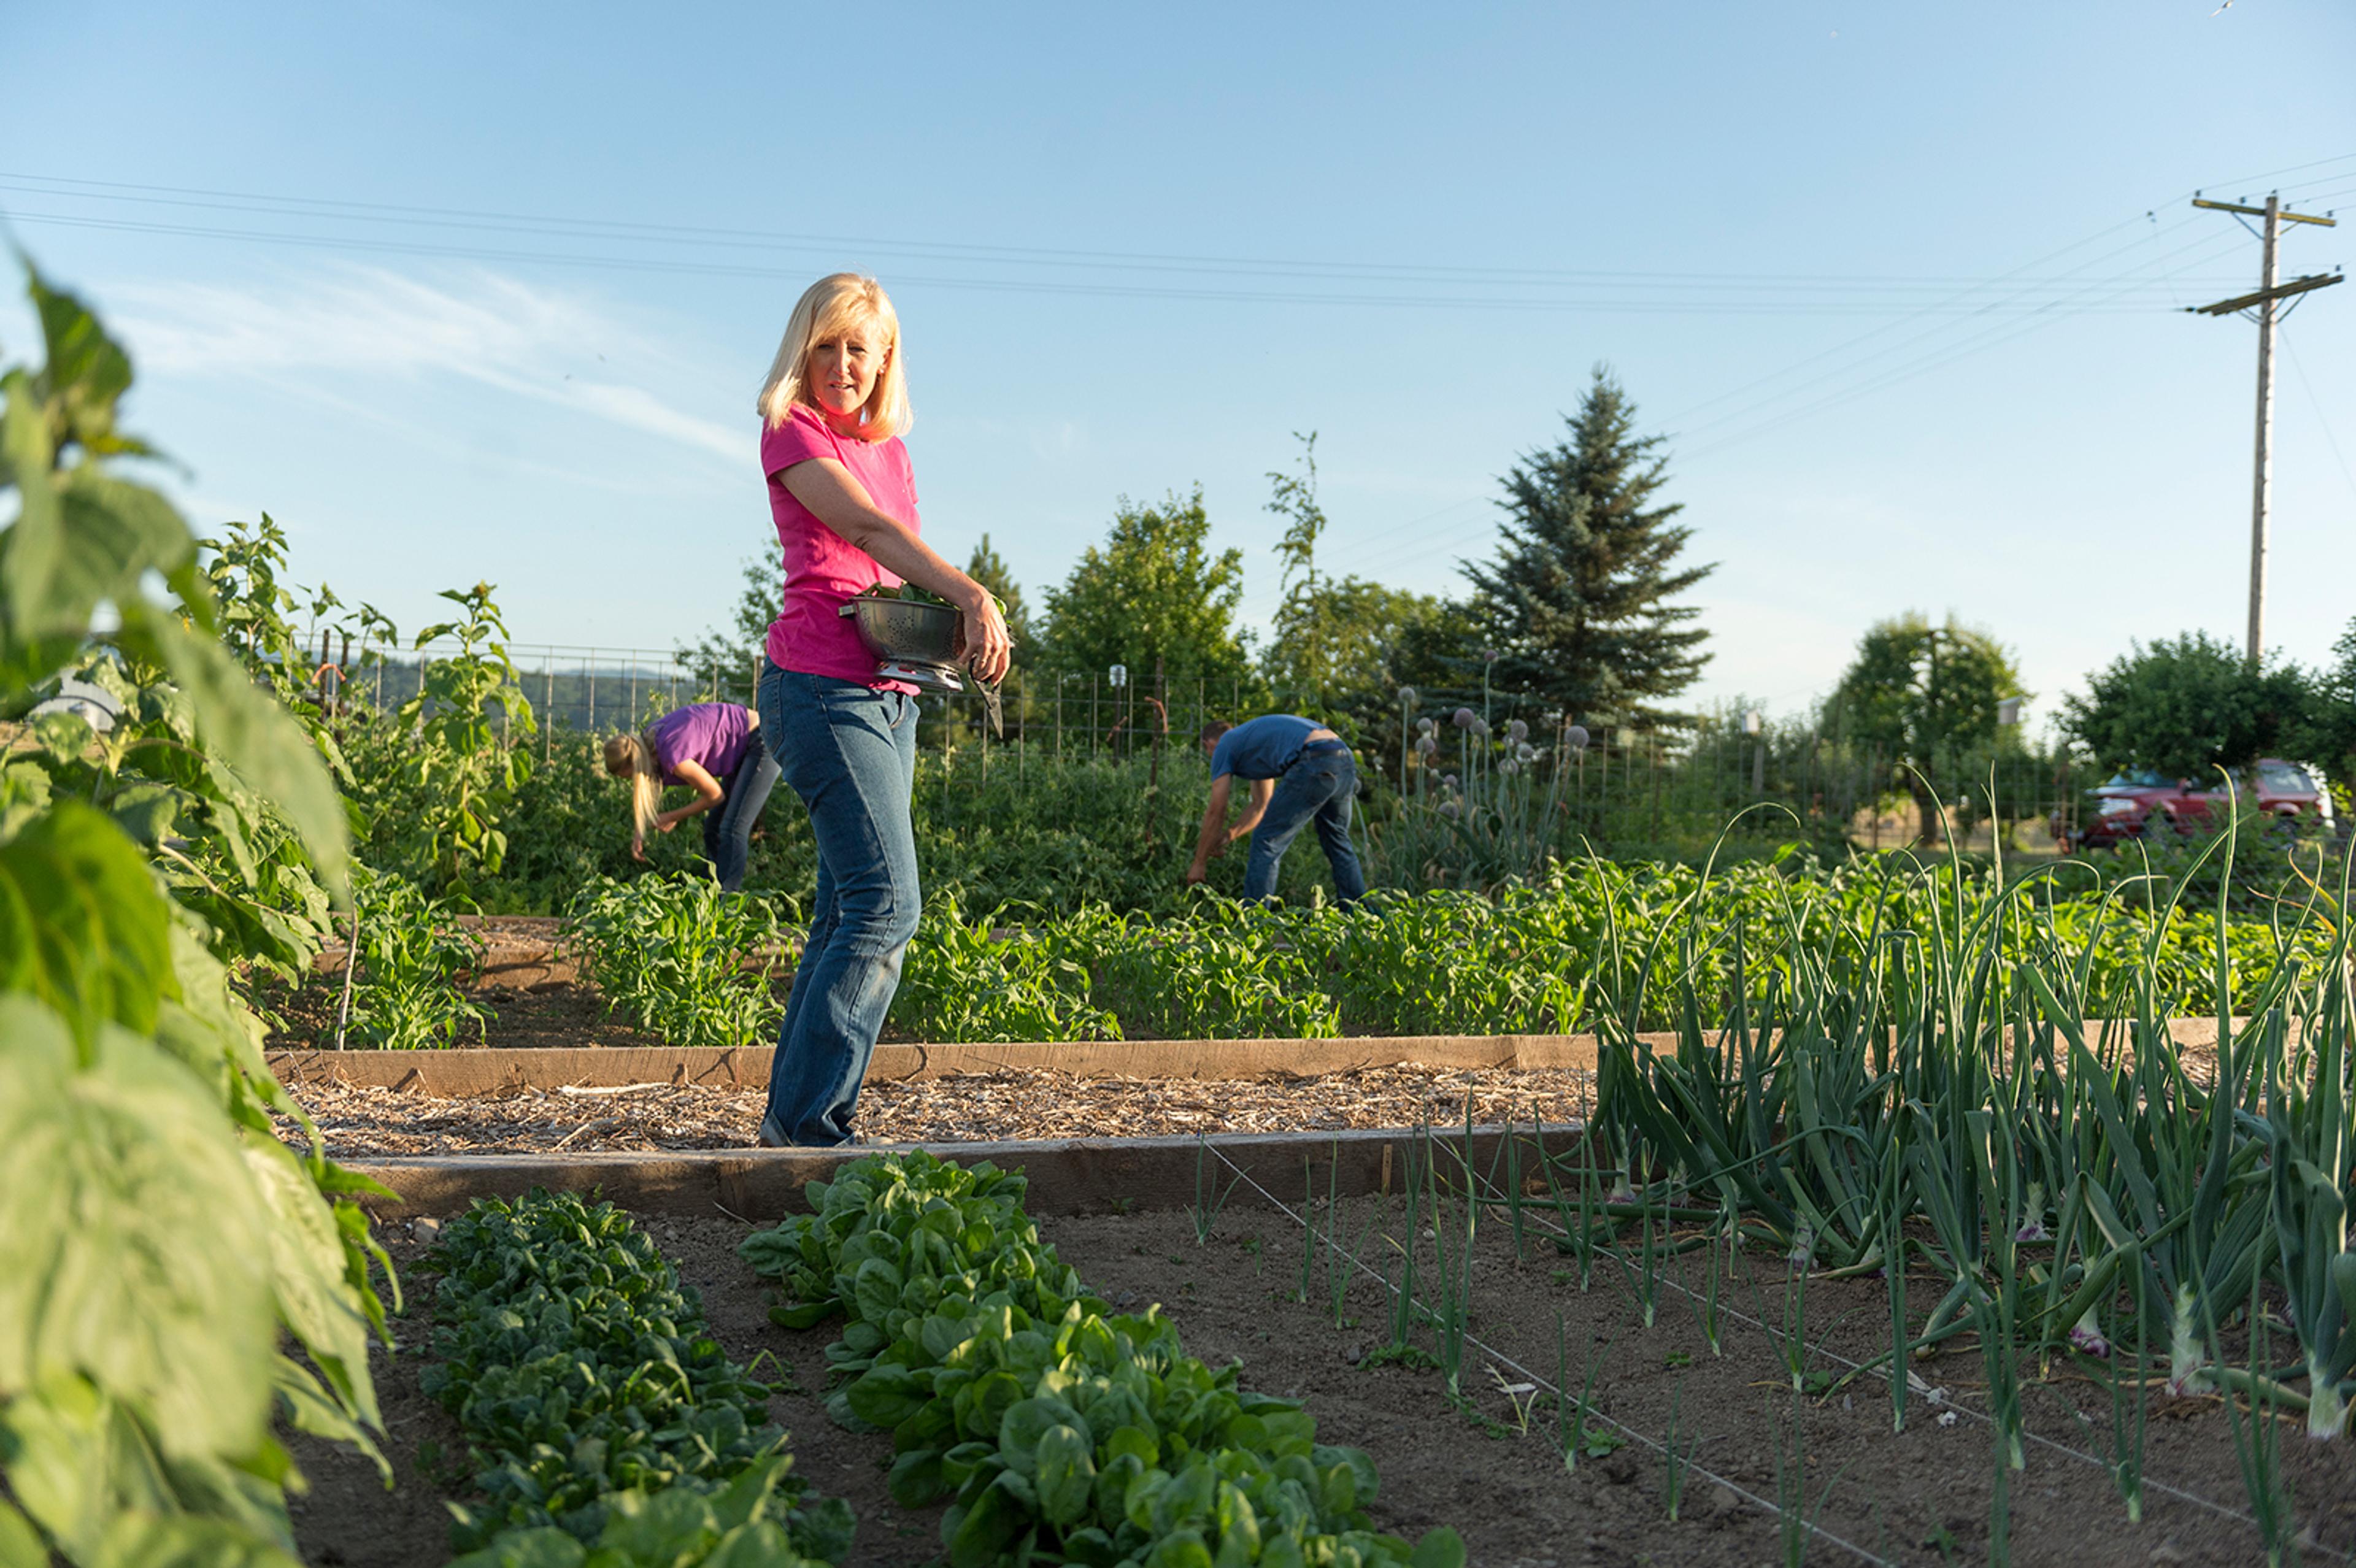 Juli Bansen surveys the family’s large garden while two of her children harvest in the background.